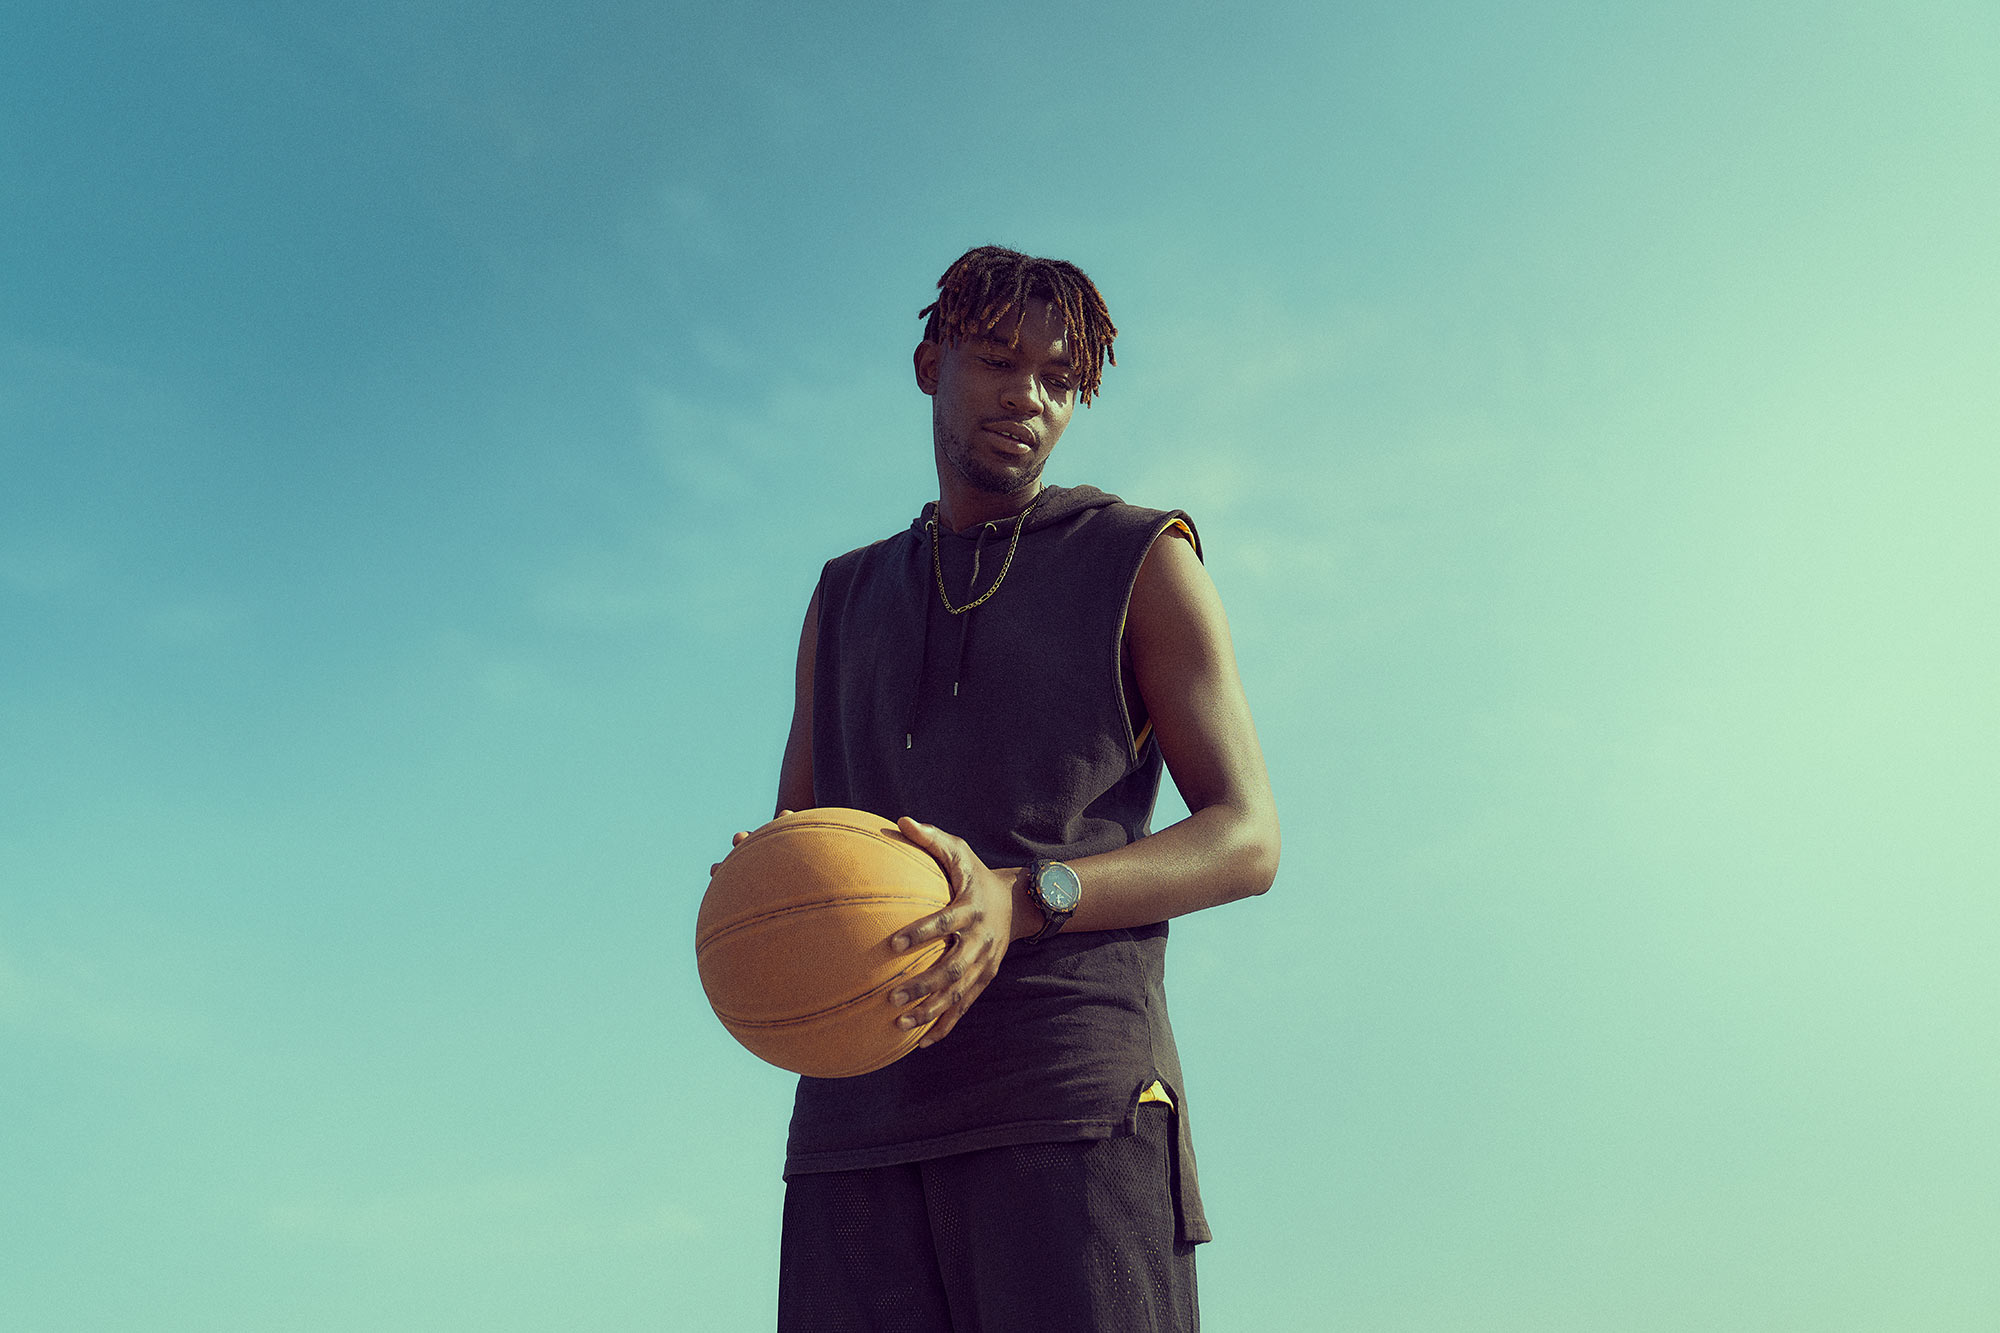 Tissot product watch print campaign featuring basketball players engaged in a one-on-one game at the V&A Waterfront in Cape Town. The photograph is taken using natural lighting, showcasing the players' skill and intensity as they compete. The Tissot watch is prominently displayed, highlighting its presence and association with the exciting sporting event.